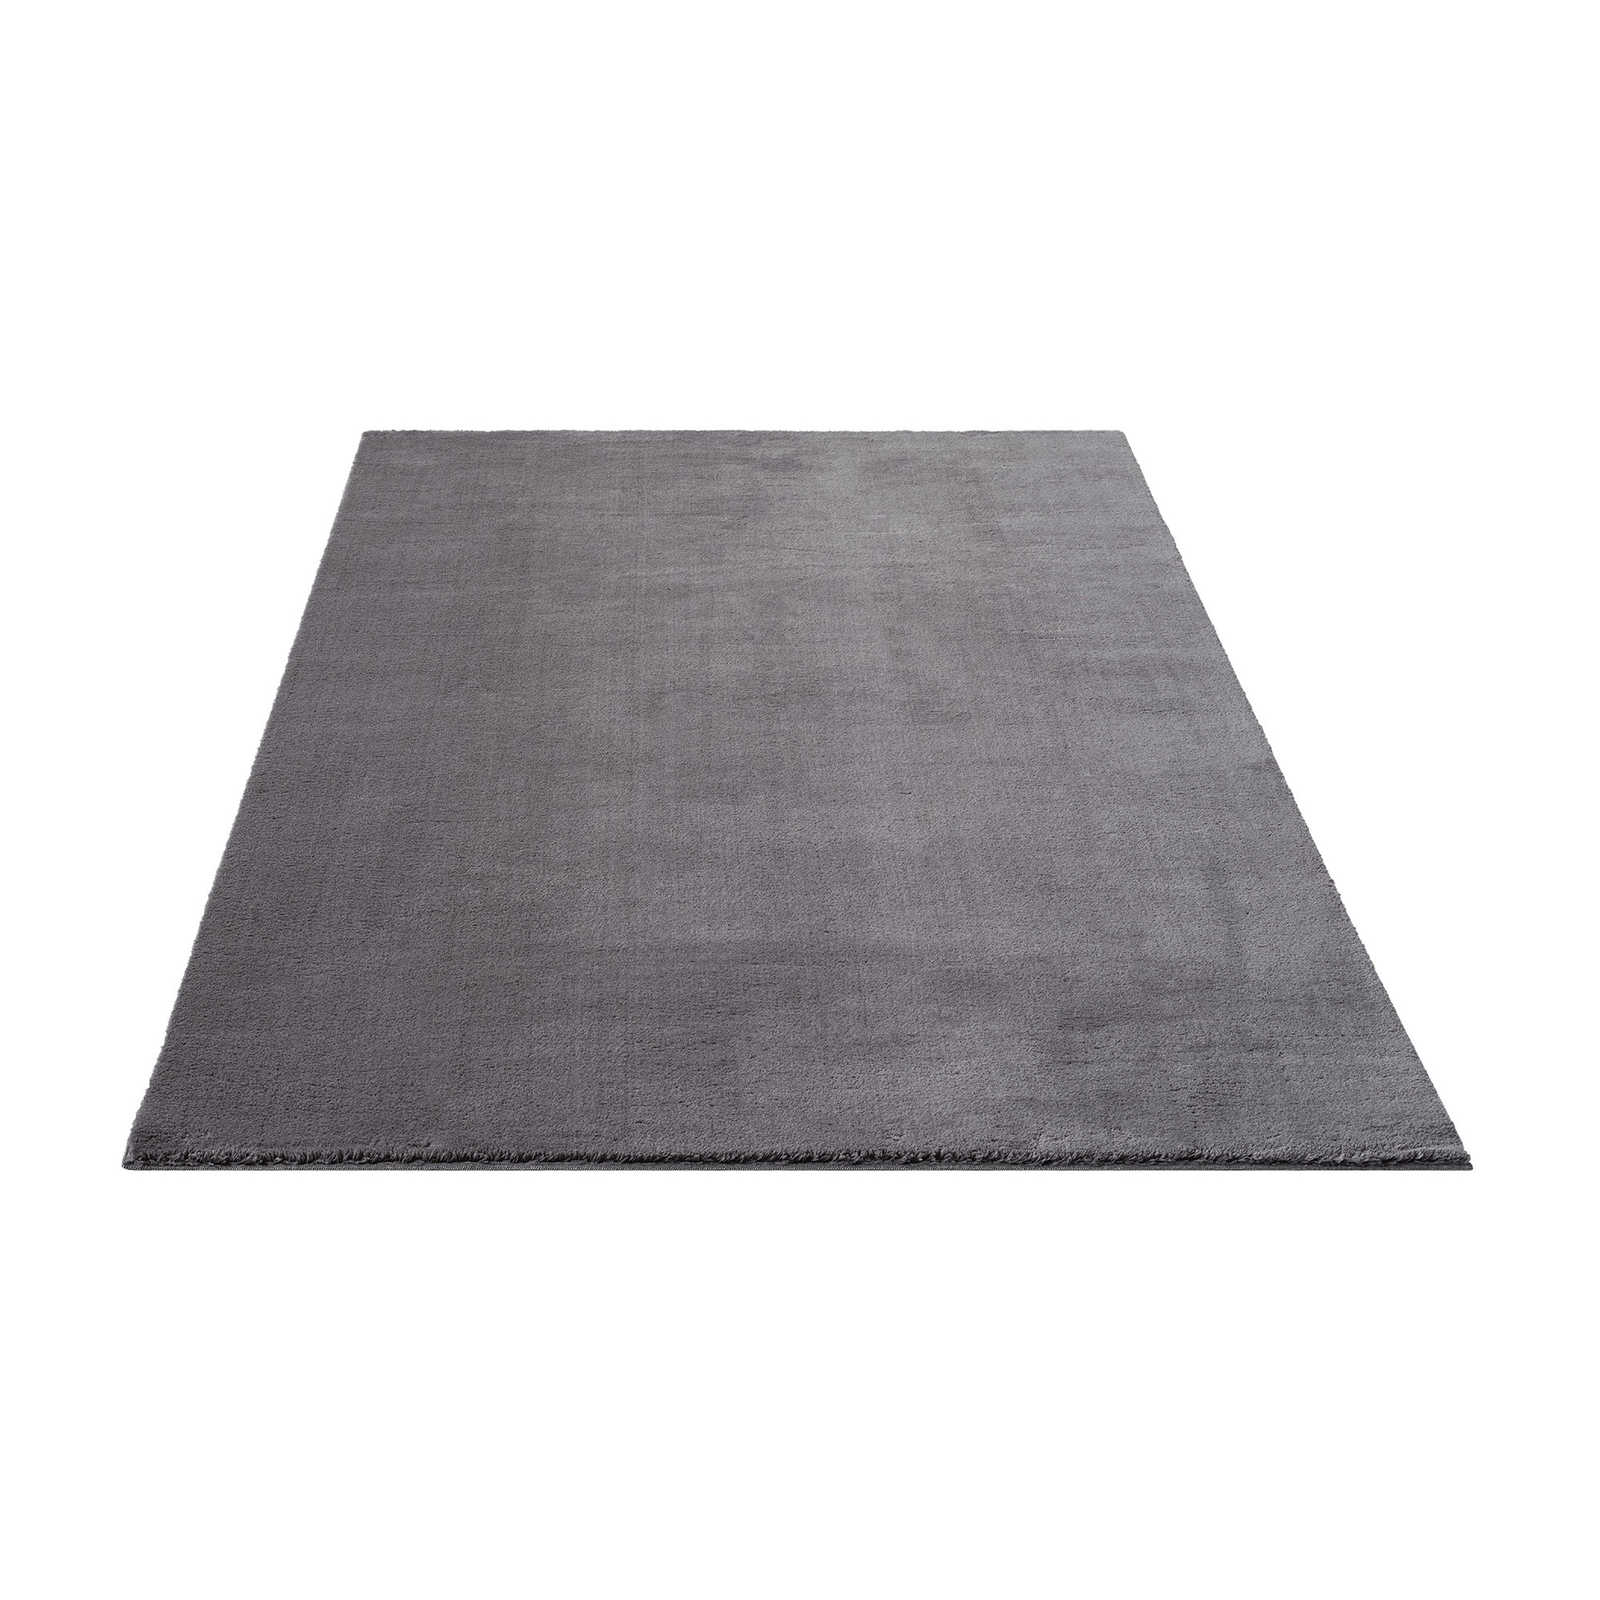 Fluffy high pile carpet in anthracite - 290 x 200 cm
